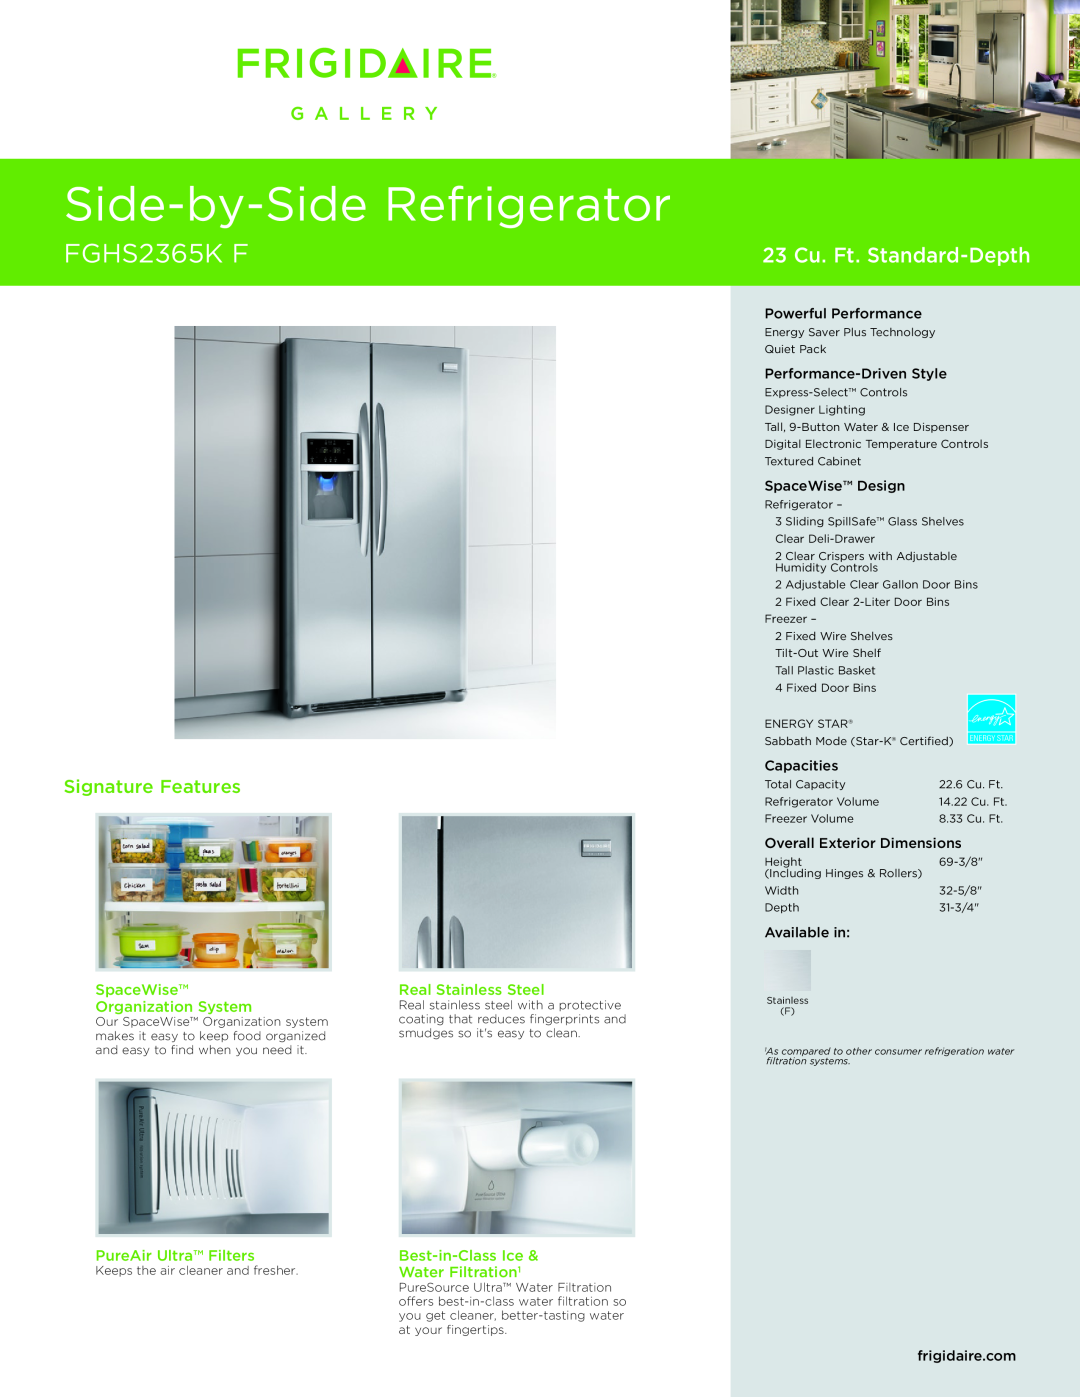 Frigidaire FGHS2365KF dimensions SpaceWise, Real Stainless Steel, Organization System, PureAir Ultra Filters, Capacities 